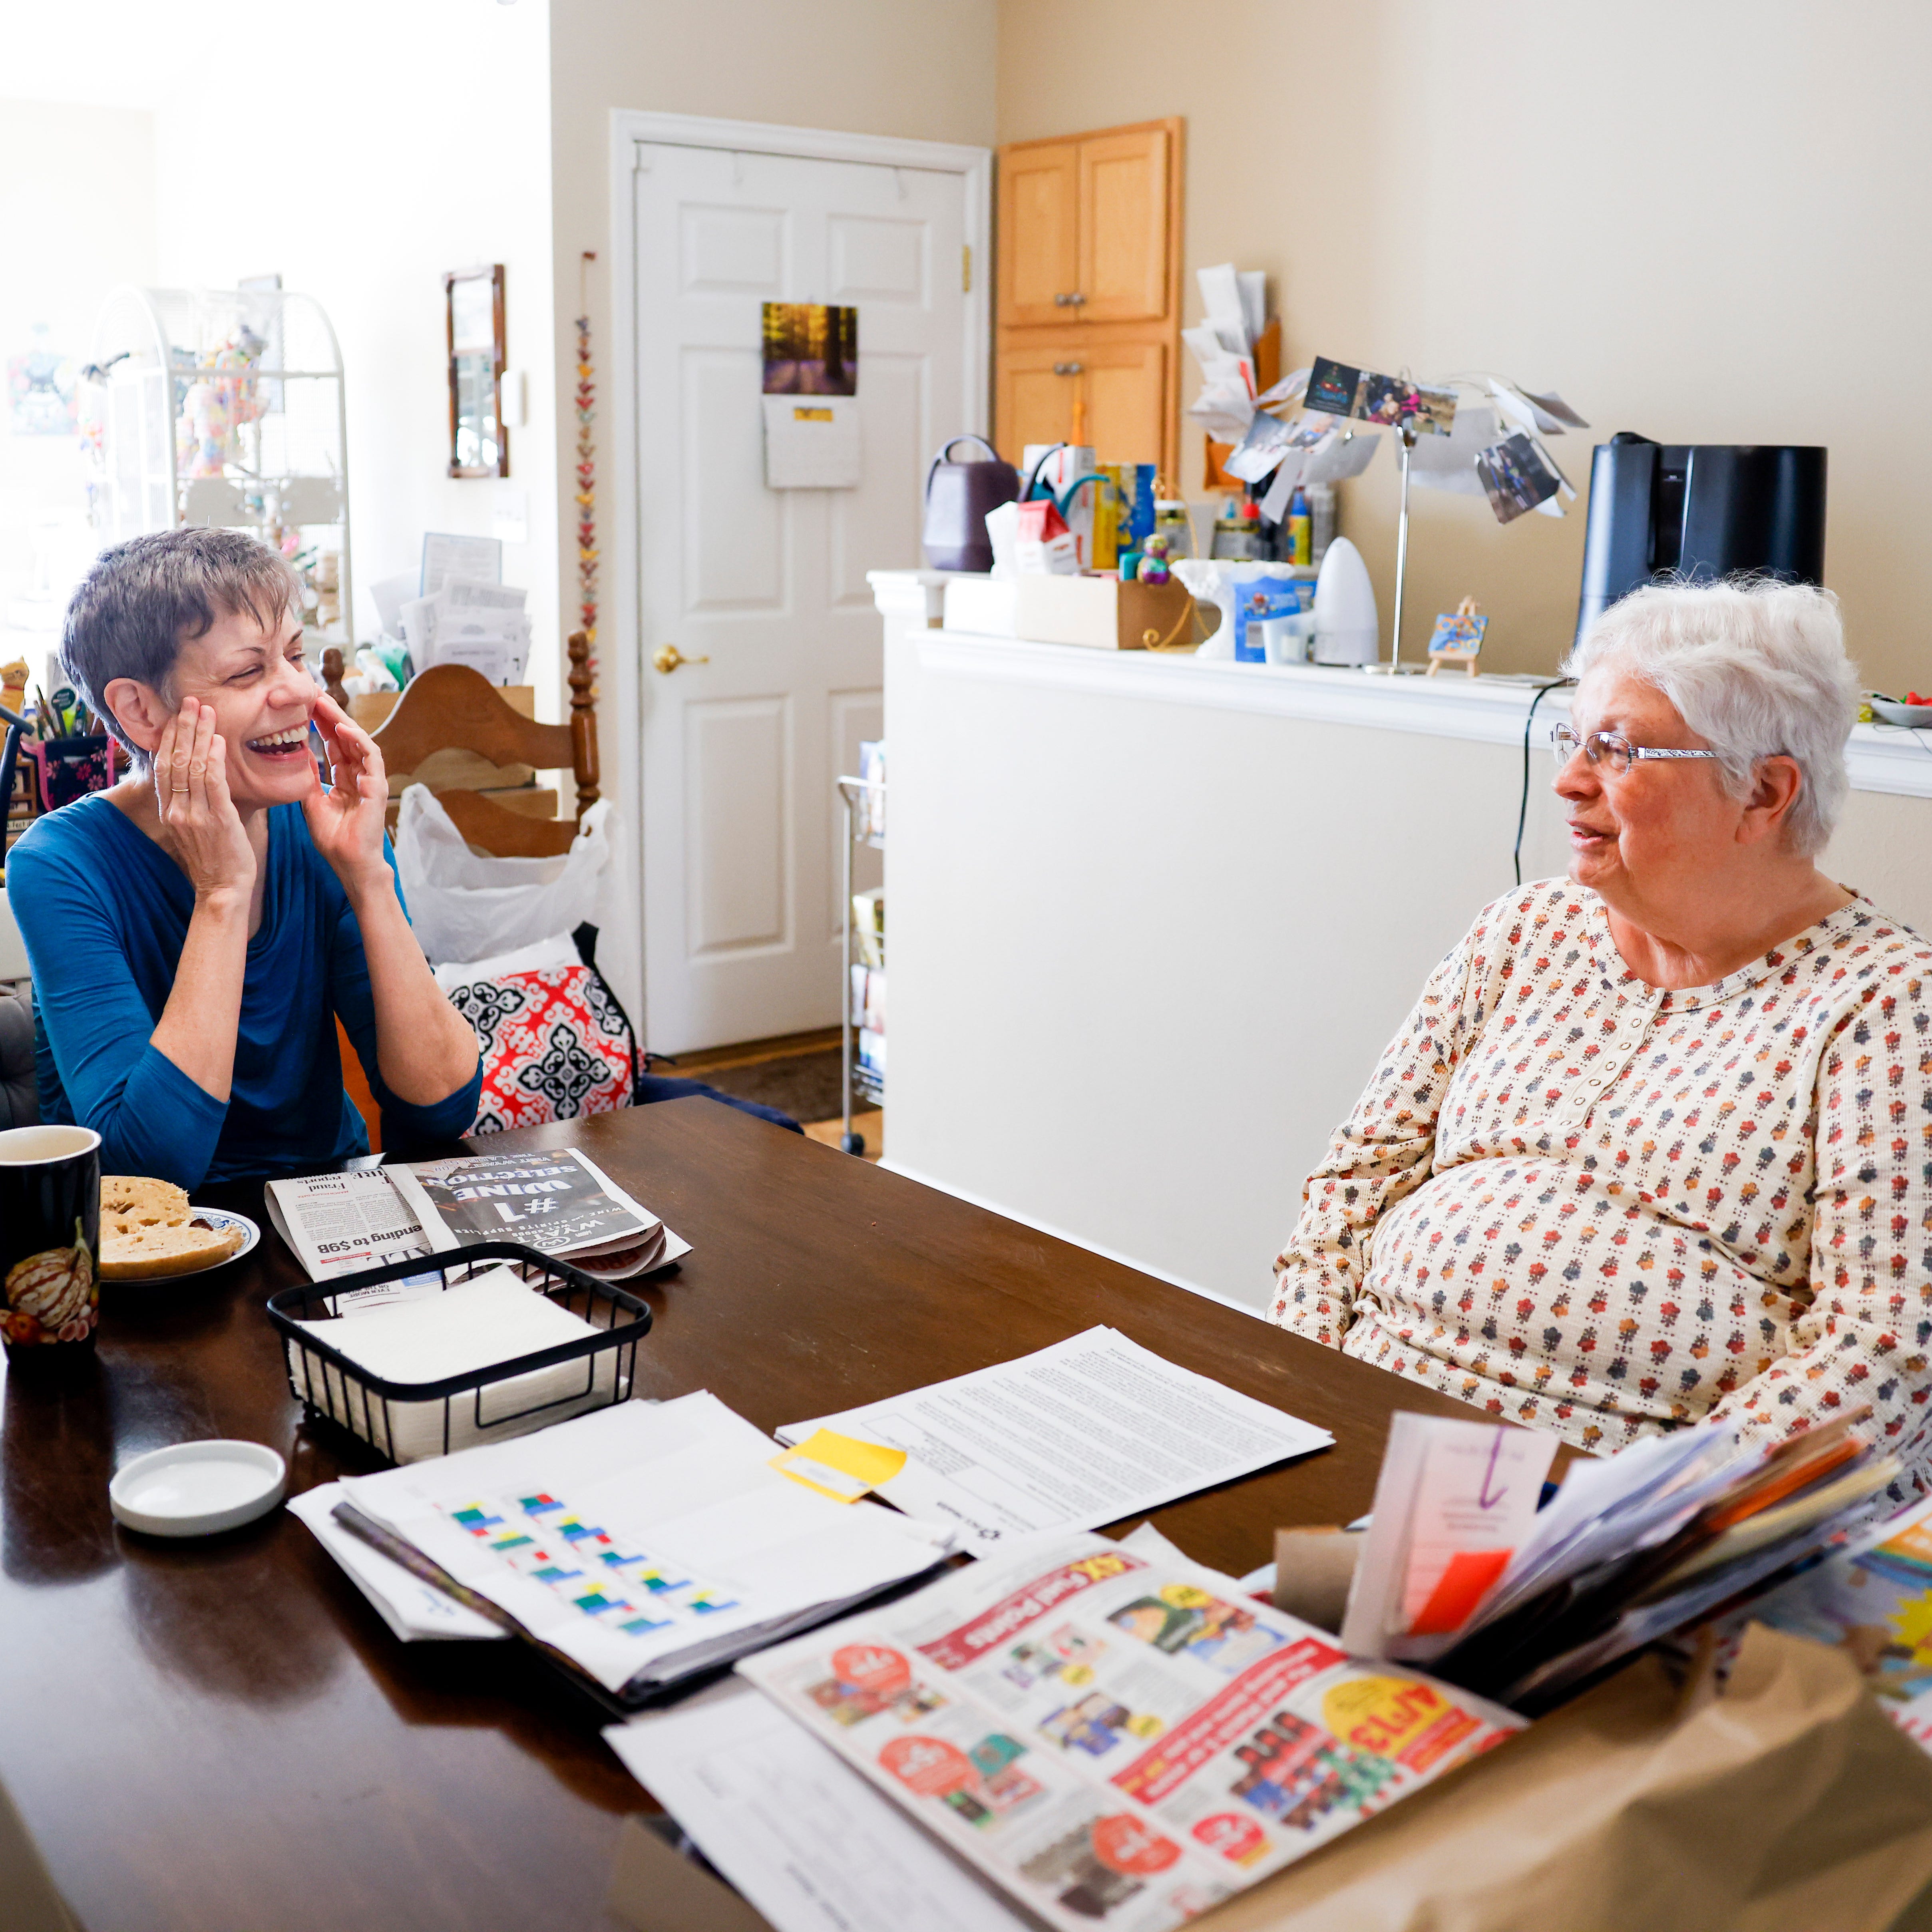 Marlene Mears, left, and Becky Miller, right, chat at their kitchen table in Longmont, Colo. Mears has been a tenant at Miller's home for over two years.